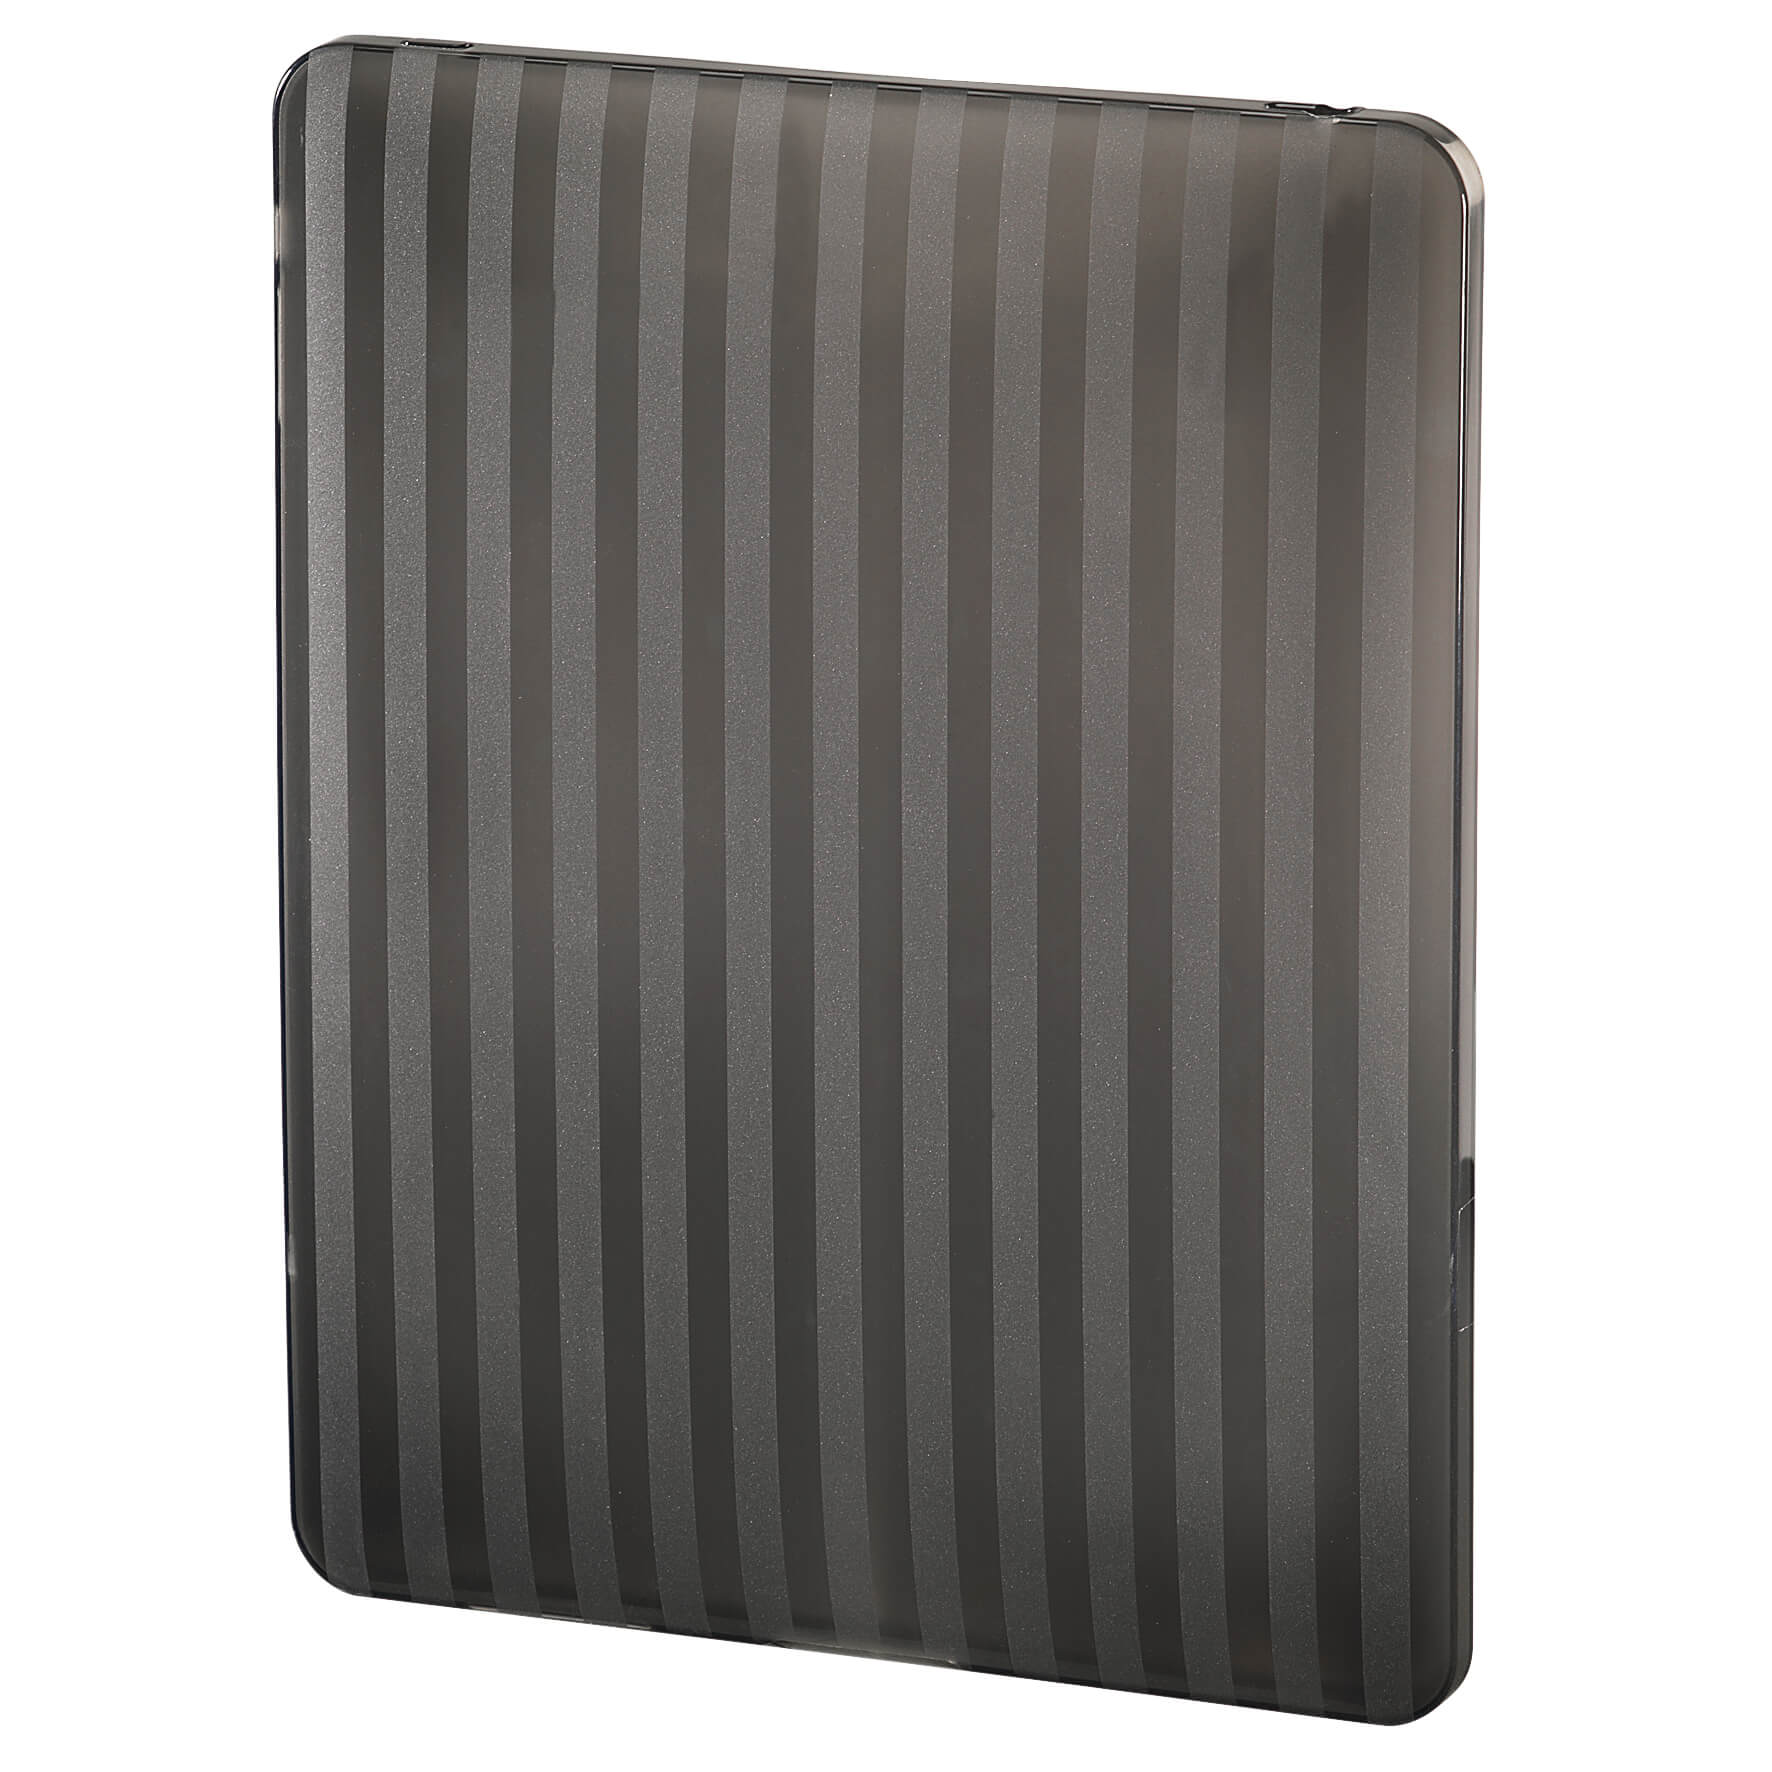 Stripes Cover for iPad 2/3rd/ 4th Generation, black